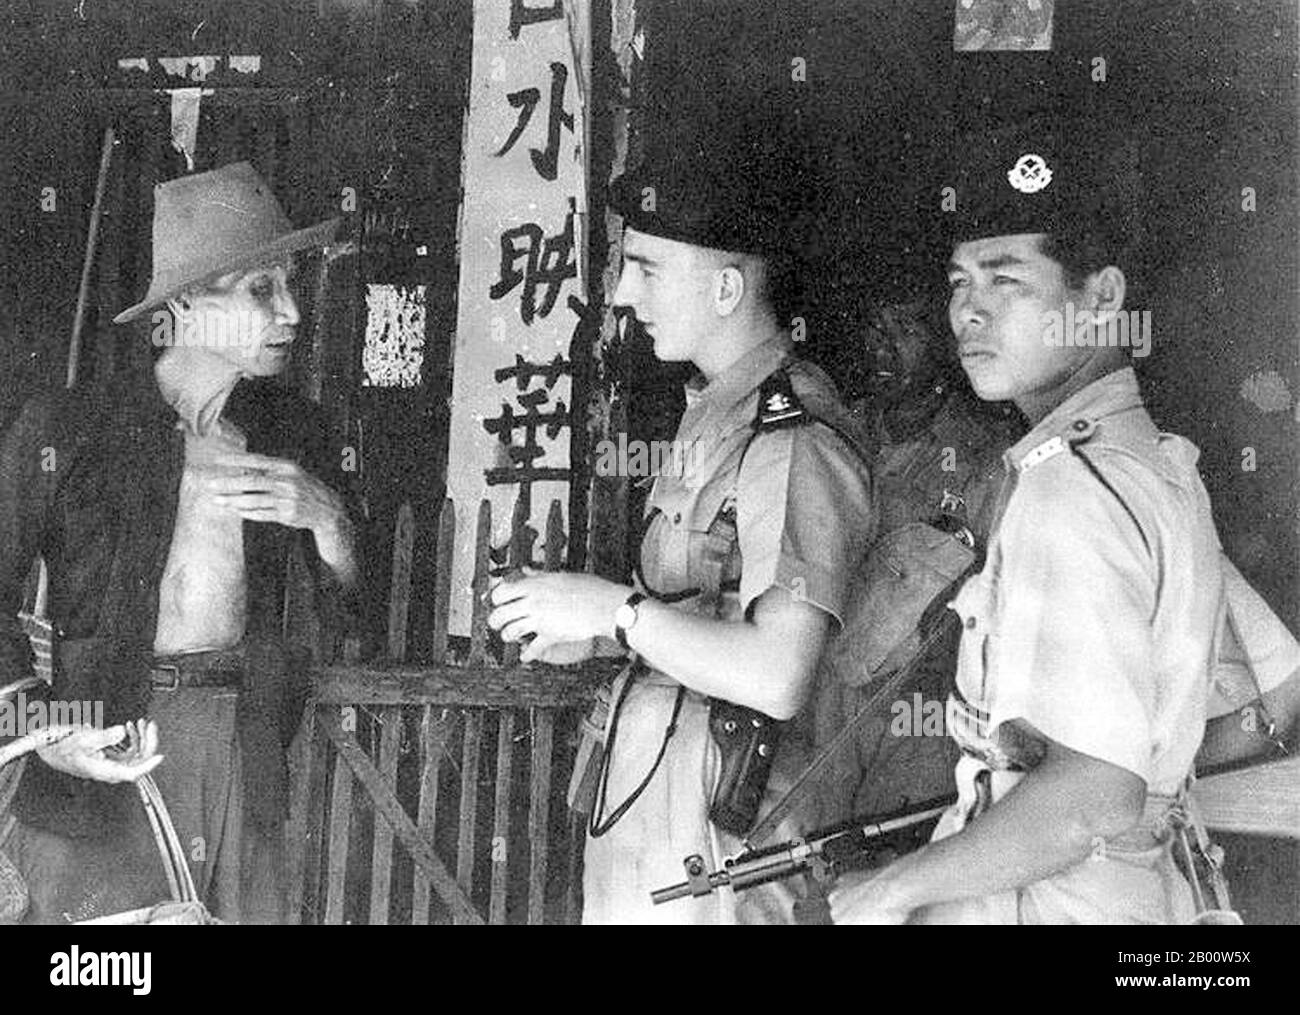 Malaysia: British and Malay military police check the credentials of an elderly Sino-Malay during the 'Emergency', April 1949.  The Malayan Emergency was a guerrilla war fought between Commonwealth armed forces and the Malayan National Liberation Army (MNLA), the military arm of the Malayan Communist Party, from 1948 to 1960. The Malayan Emergency was the colonial government's term for the conflict. The MNLA termed it the Anti-British National Liberation War. Despite the communists' defeat in 1960, communist leader Chin Peng renewed the insurgency in 1967; it would last until 1989. Stock Photo